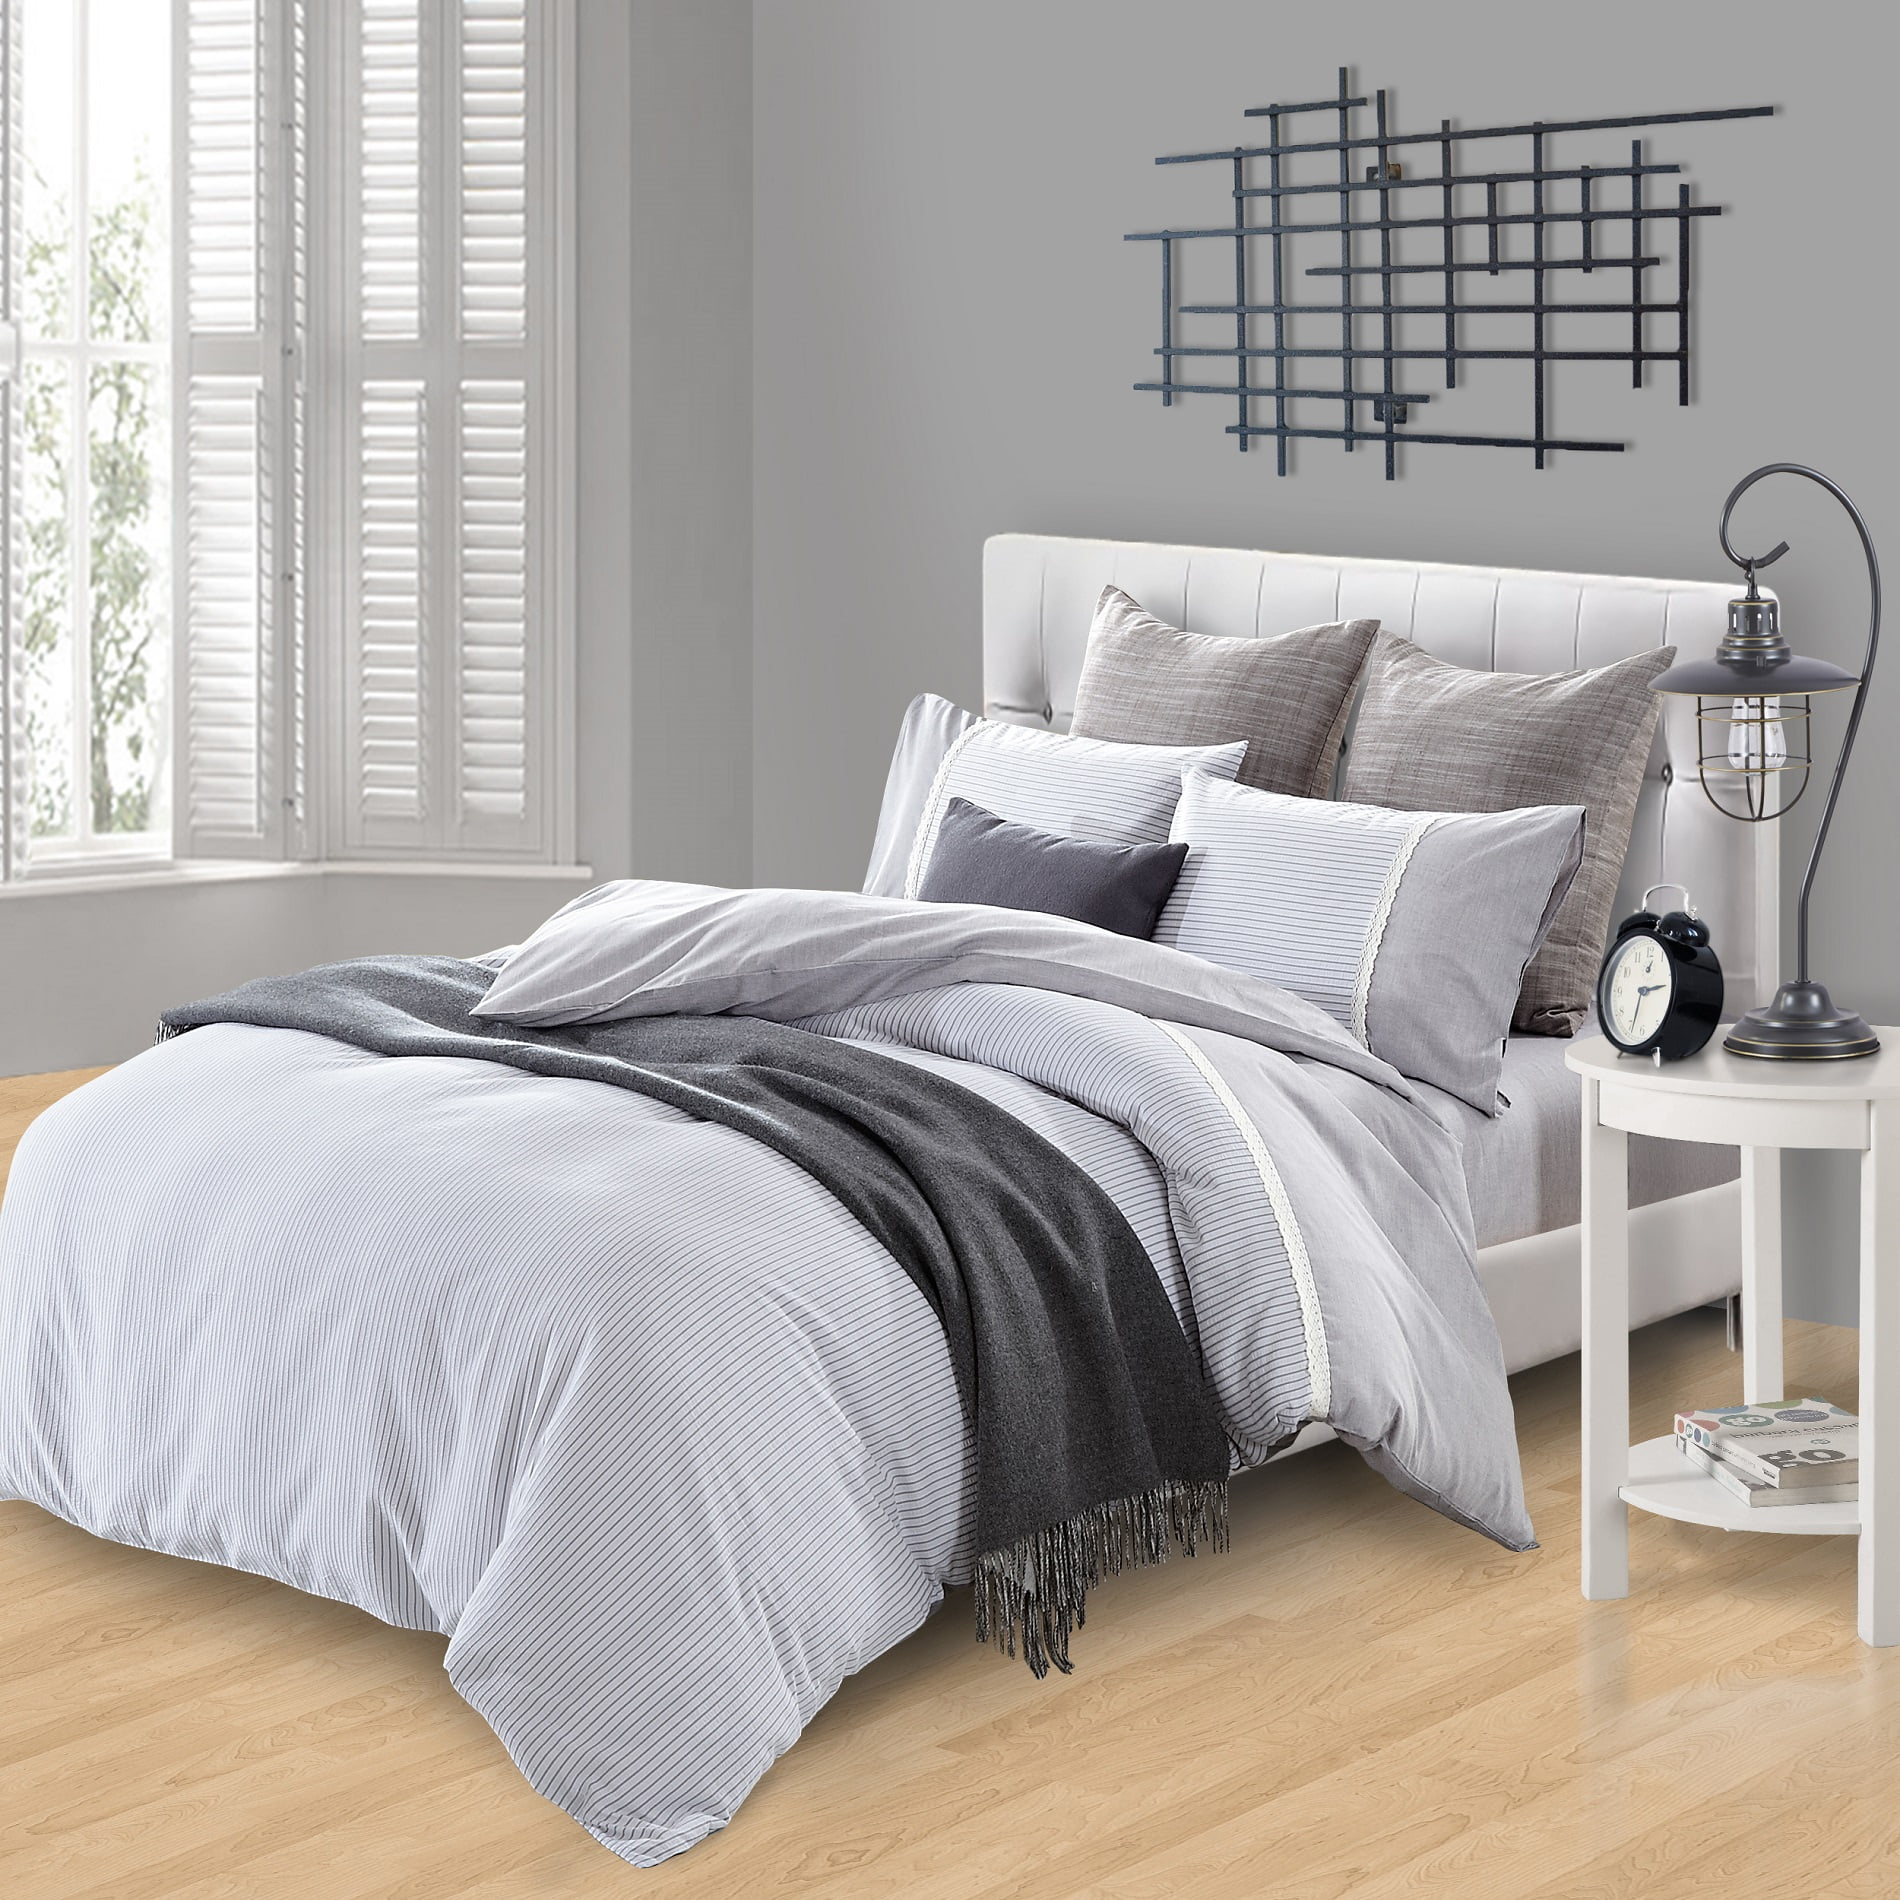 Extremely Soft Twin/Twin XL, Grayish White LIFETOWN Jersey Knit Cotton Striped Duvet Cover Twin/Twin XL Size Duvet Cover Set 3 Pieces 